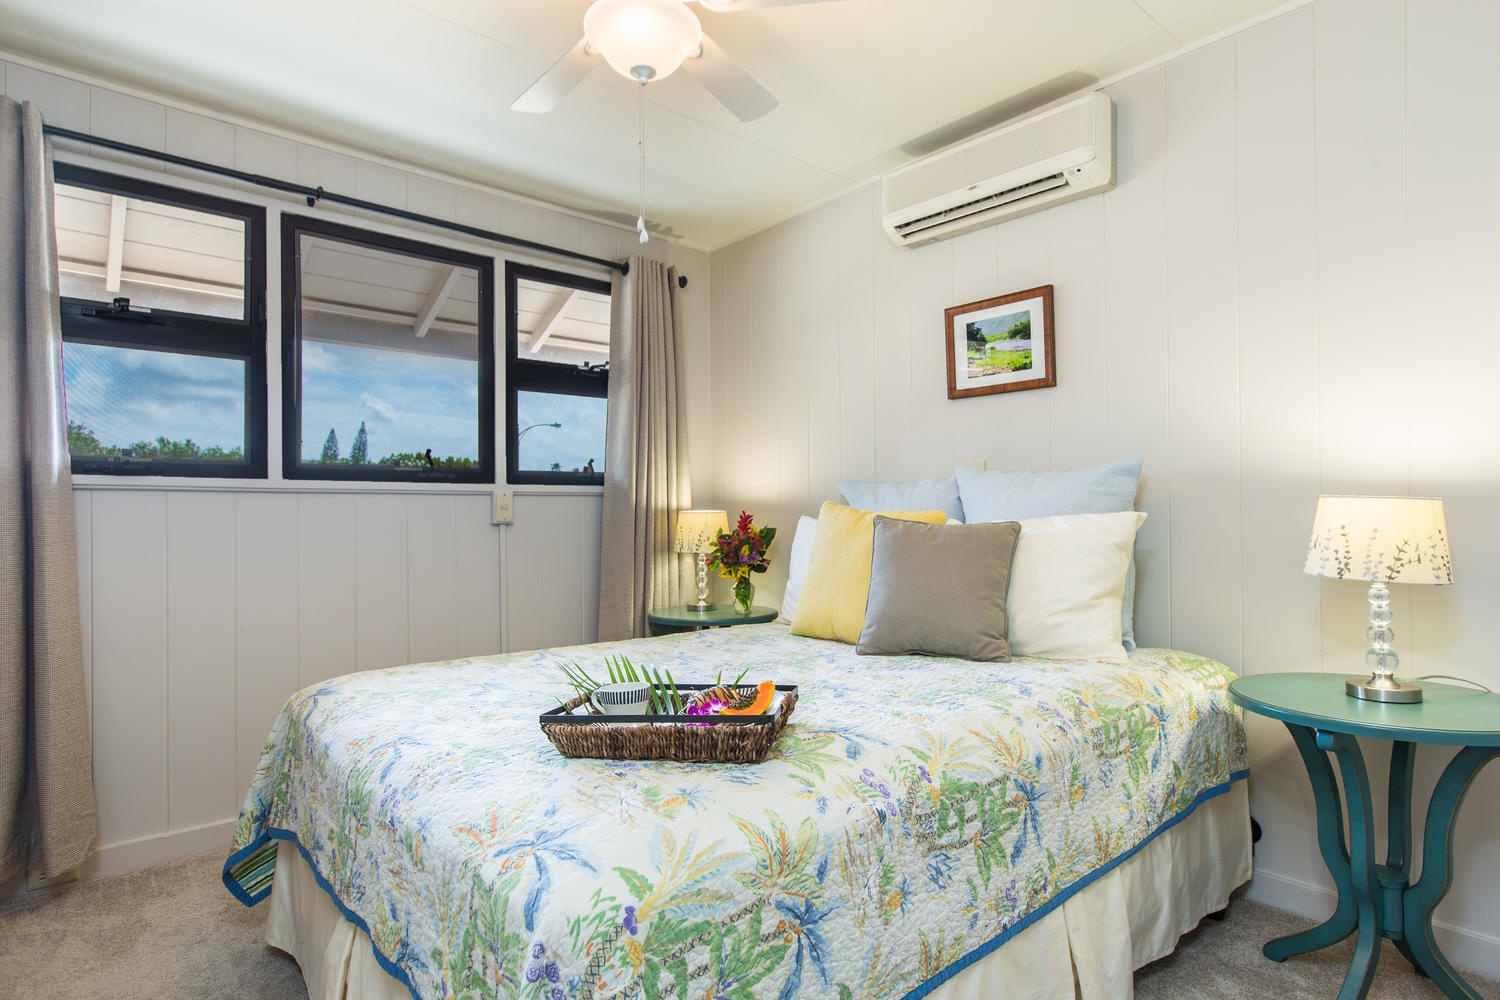 Honolulu Vacation Rentals, Hale Poola - Bedroom three, which shares a bath with bedroom two.